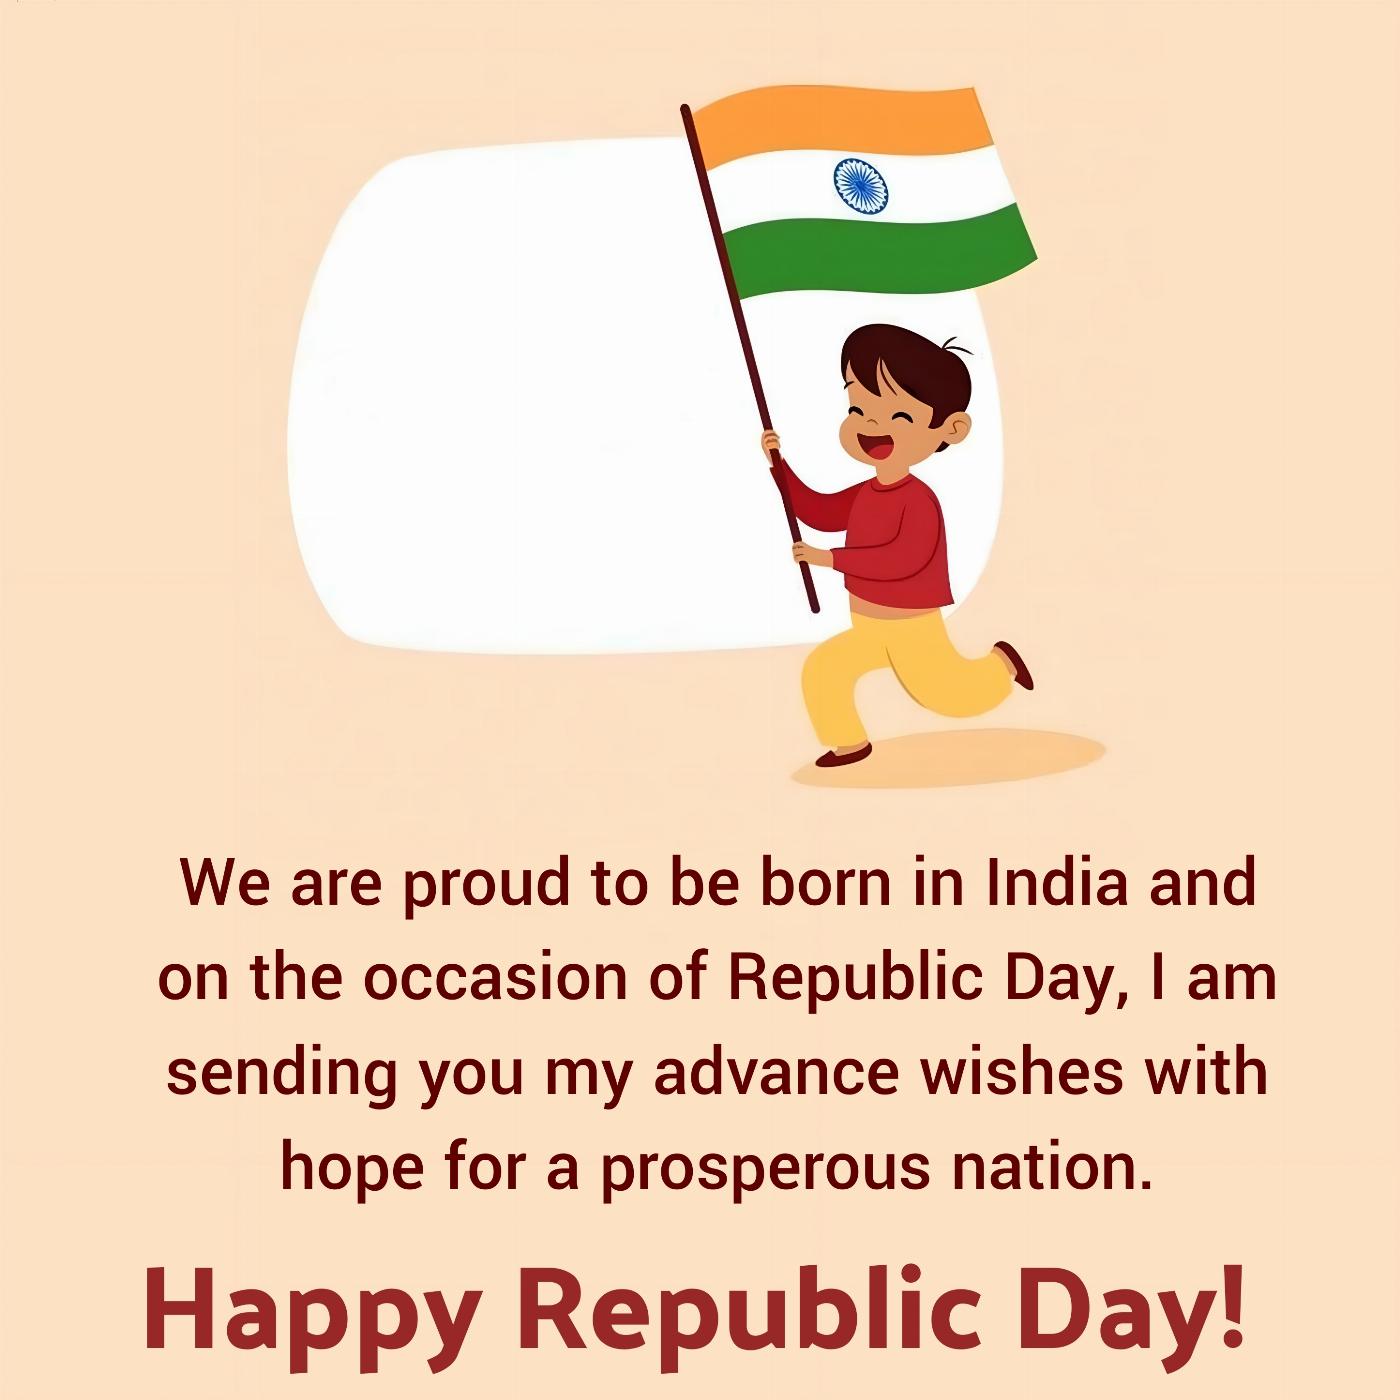 We are proud to be born in India and on the occasion